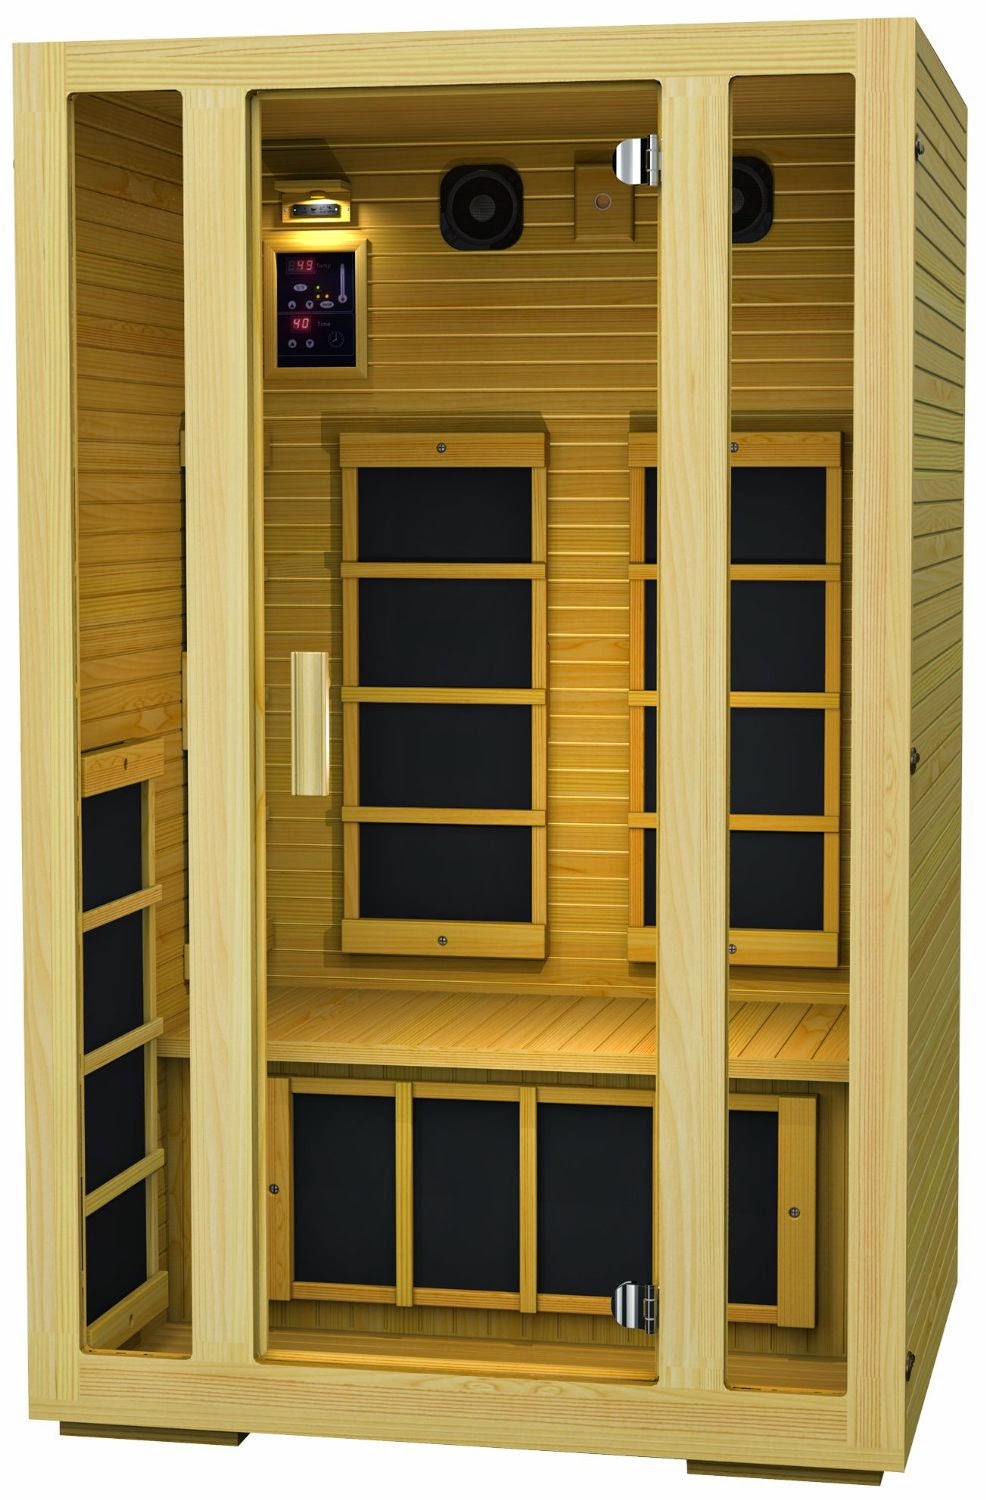 JNH Lifestyles 2 Person Far Infrared Sauna 7 Carbon Fiber Heaters, review, dual wall construction for better heat insulation, easy to use digital control, premium sound system, tools-free design for easy construction, ETL approved, UL-listed components, 100% Canadian Hemlock T&G timber